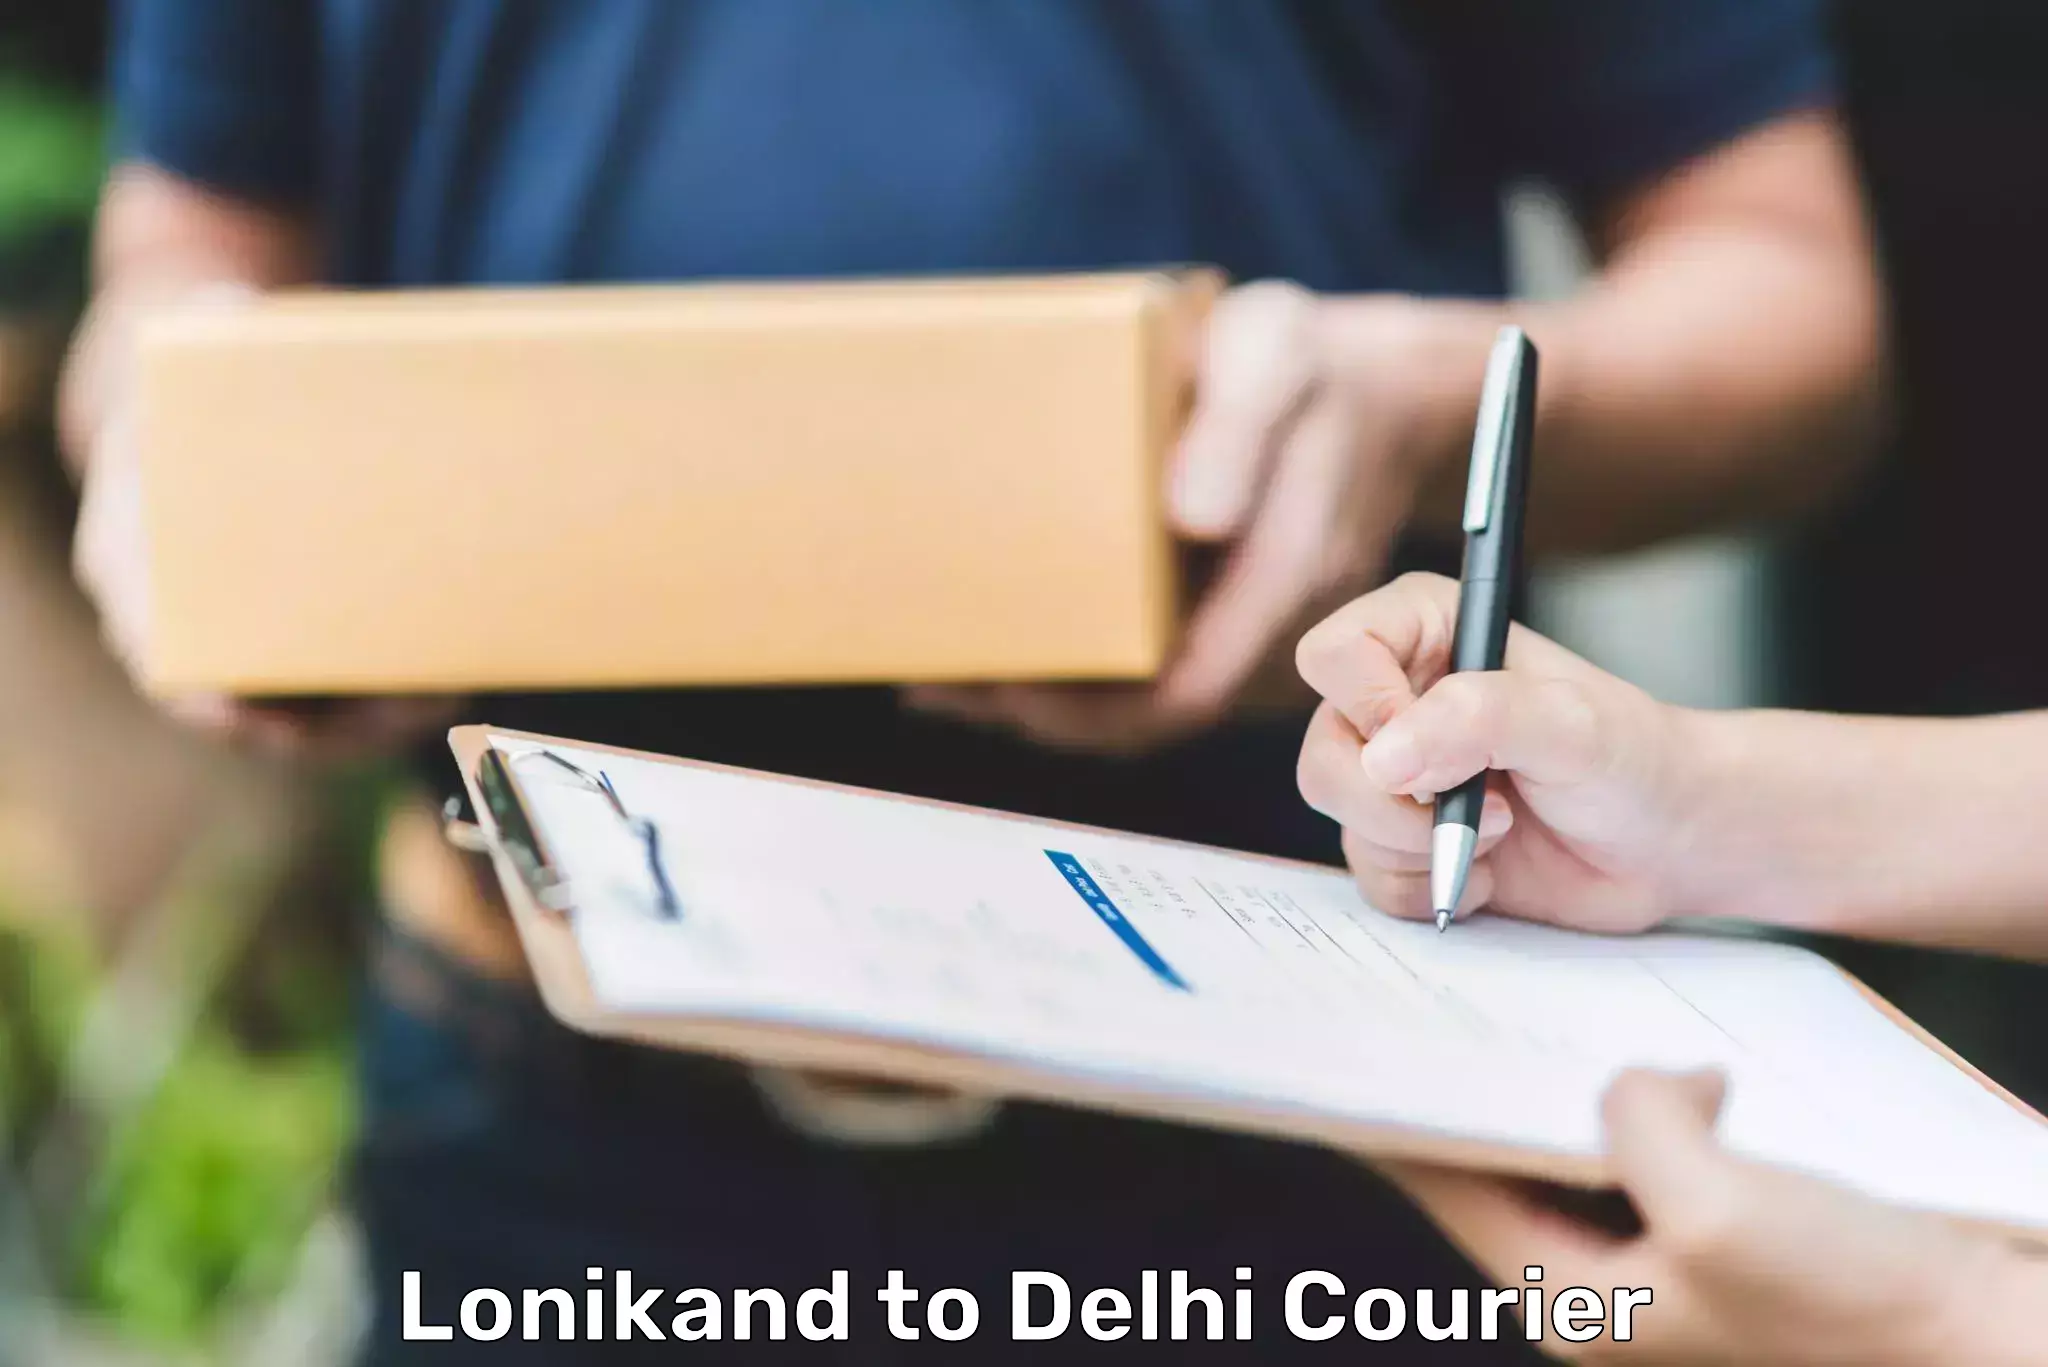 Fragile item shipping in Lonikand to East Delhi